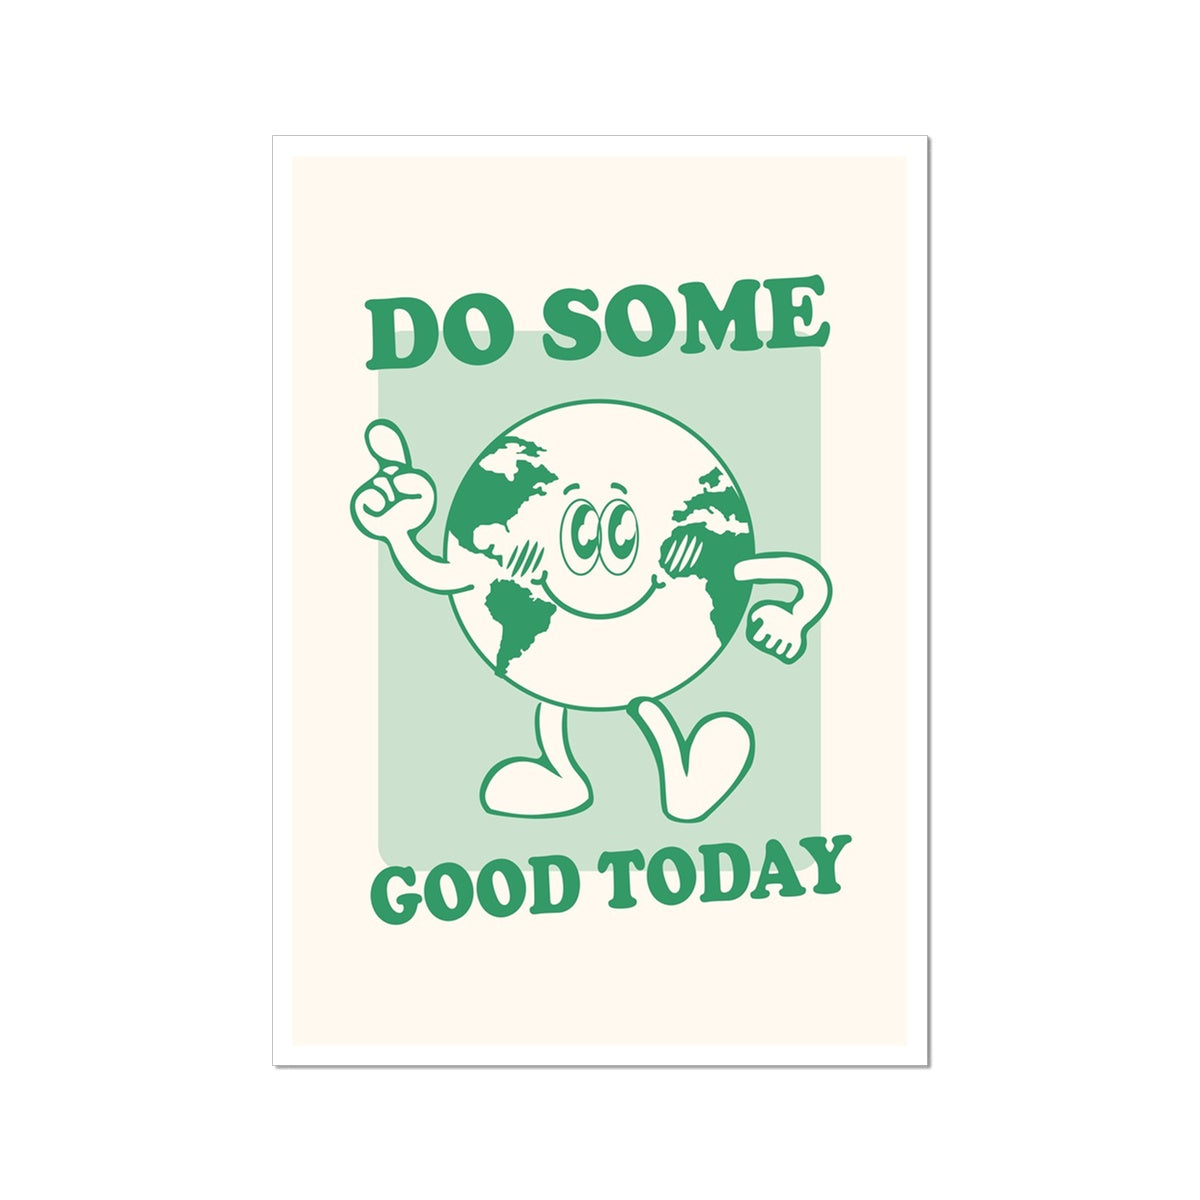 Do Some Good Today - Vintage Cartoon Collection - Eco Earth Print Home Cute Retro Mantra Positive Vibes Wall Art Poster